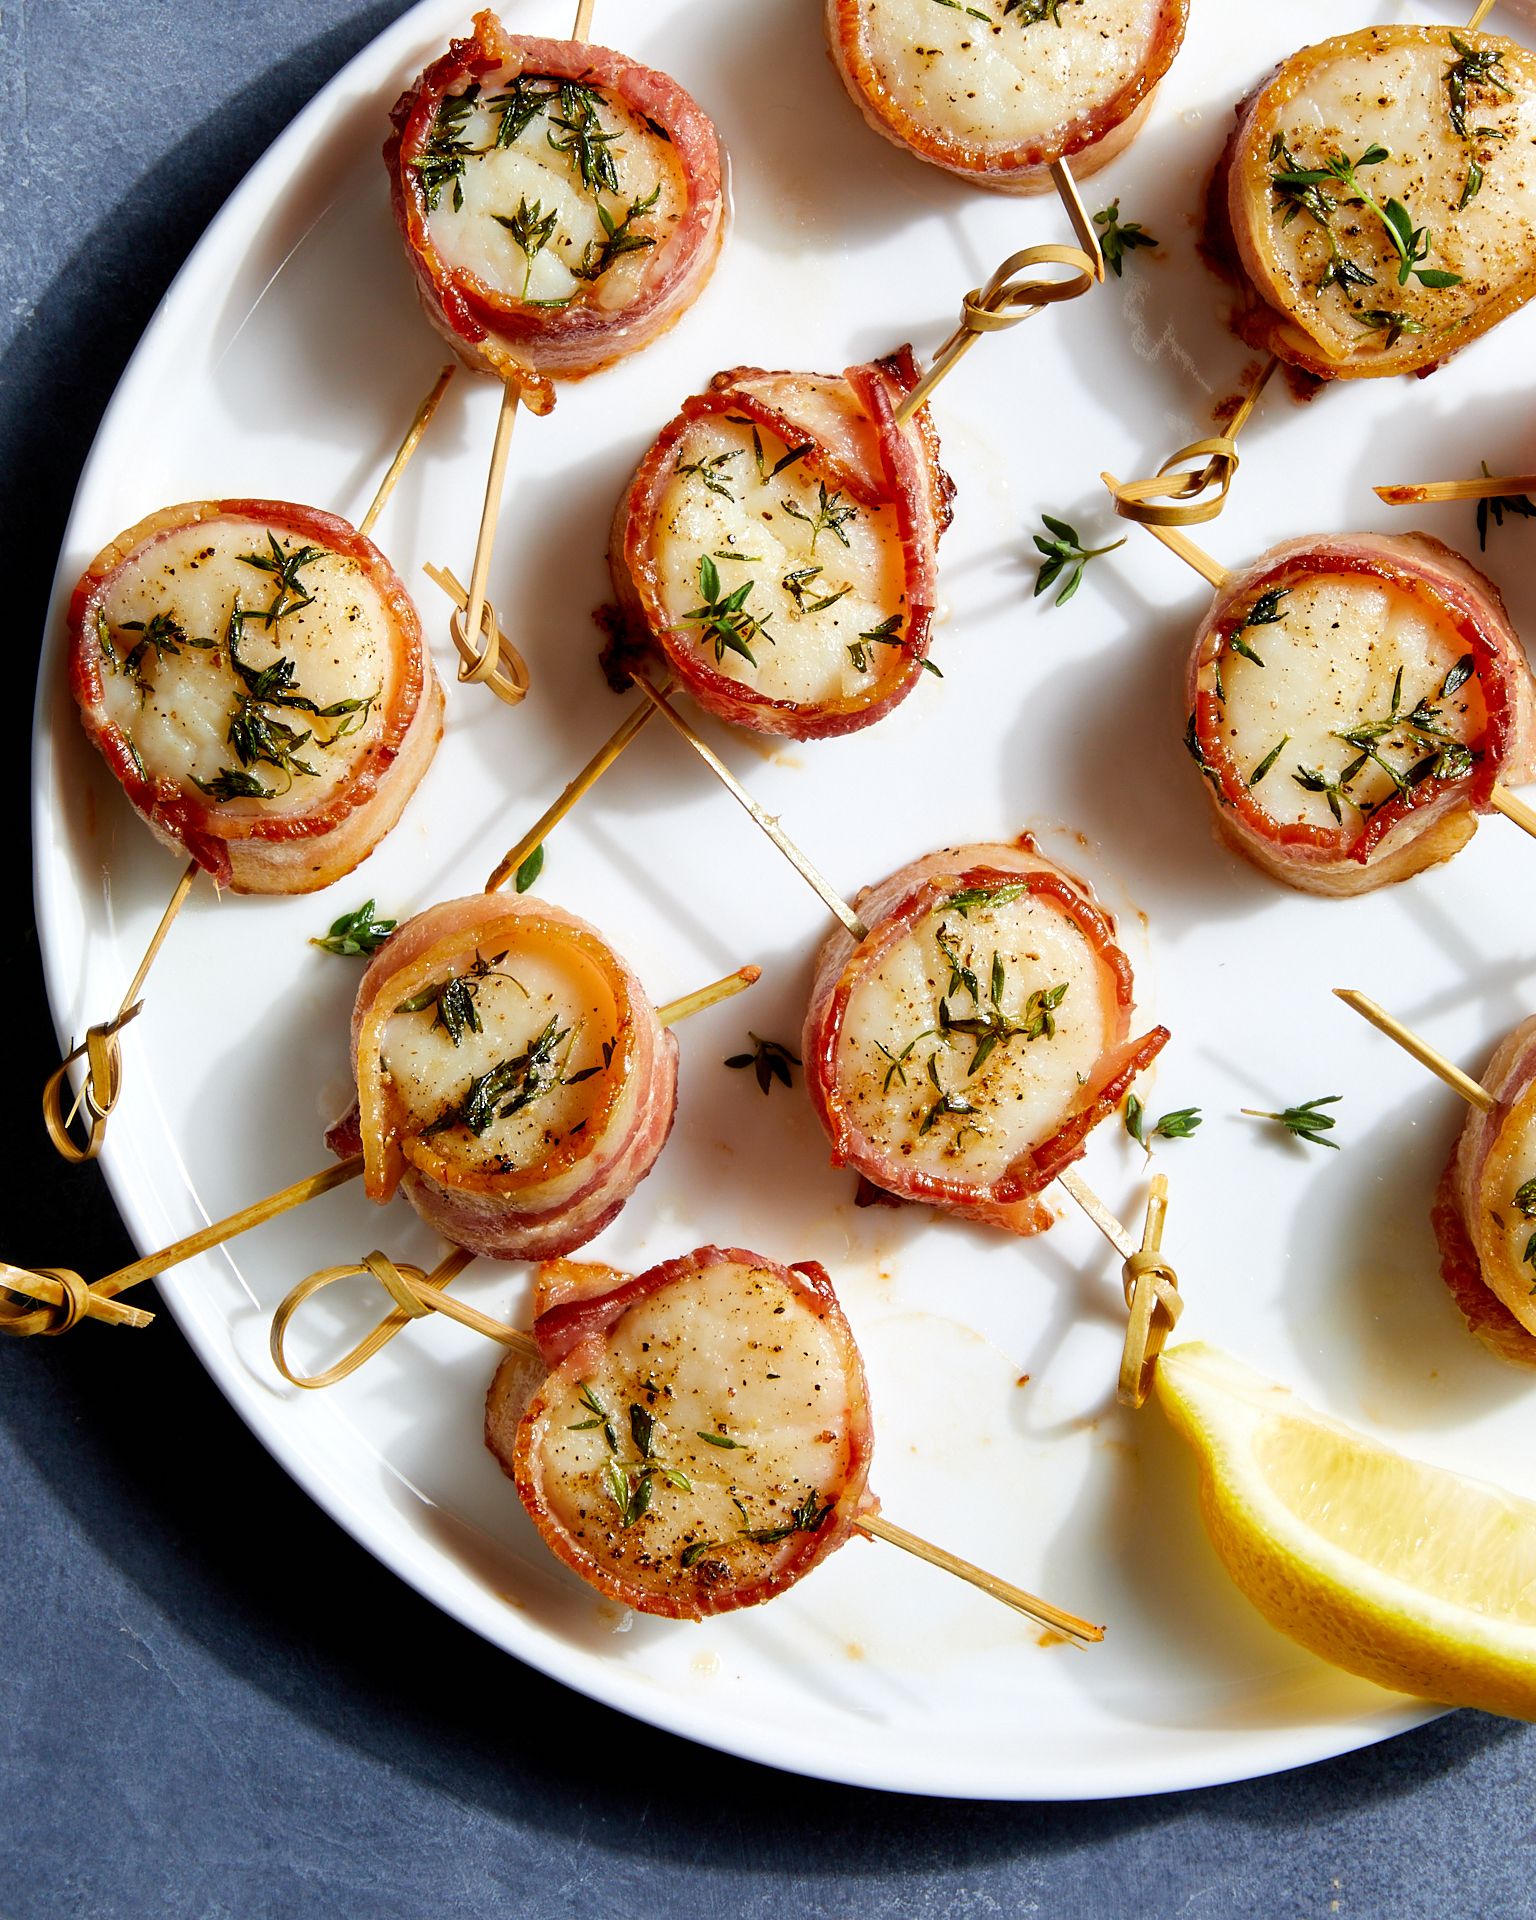 58 Best New Year's Eve Appetizers - Easy Recipes for New Year's